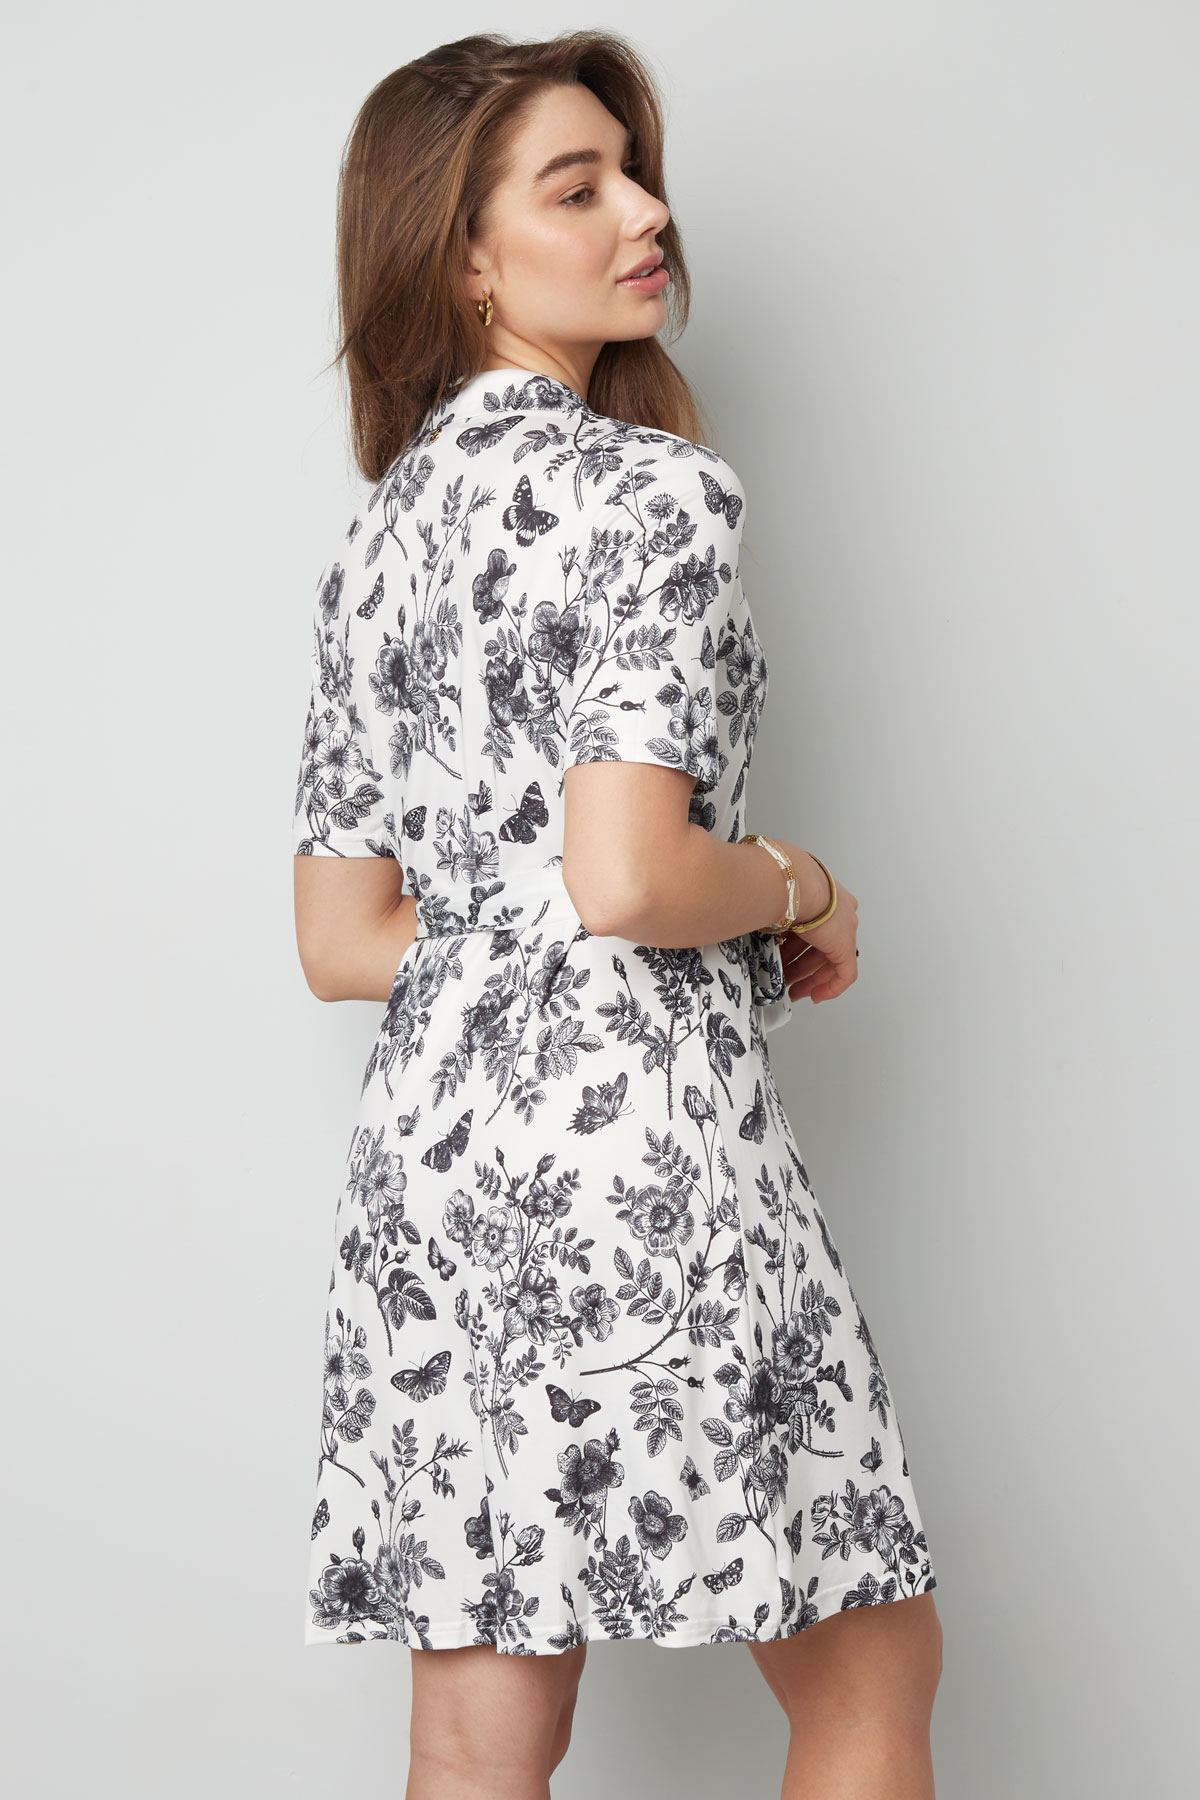 Flower dress with bow - black/white  Picture8